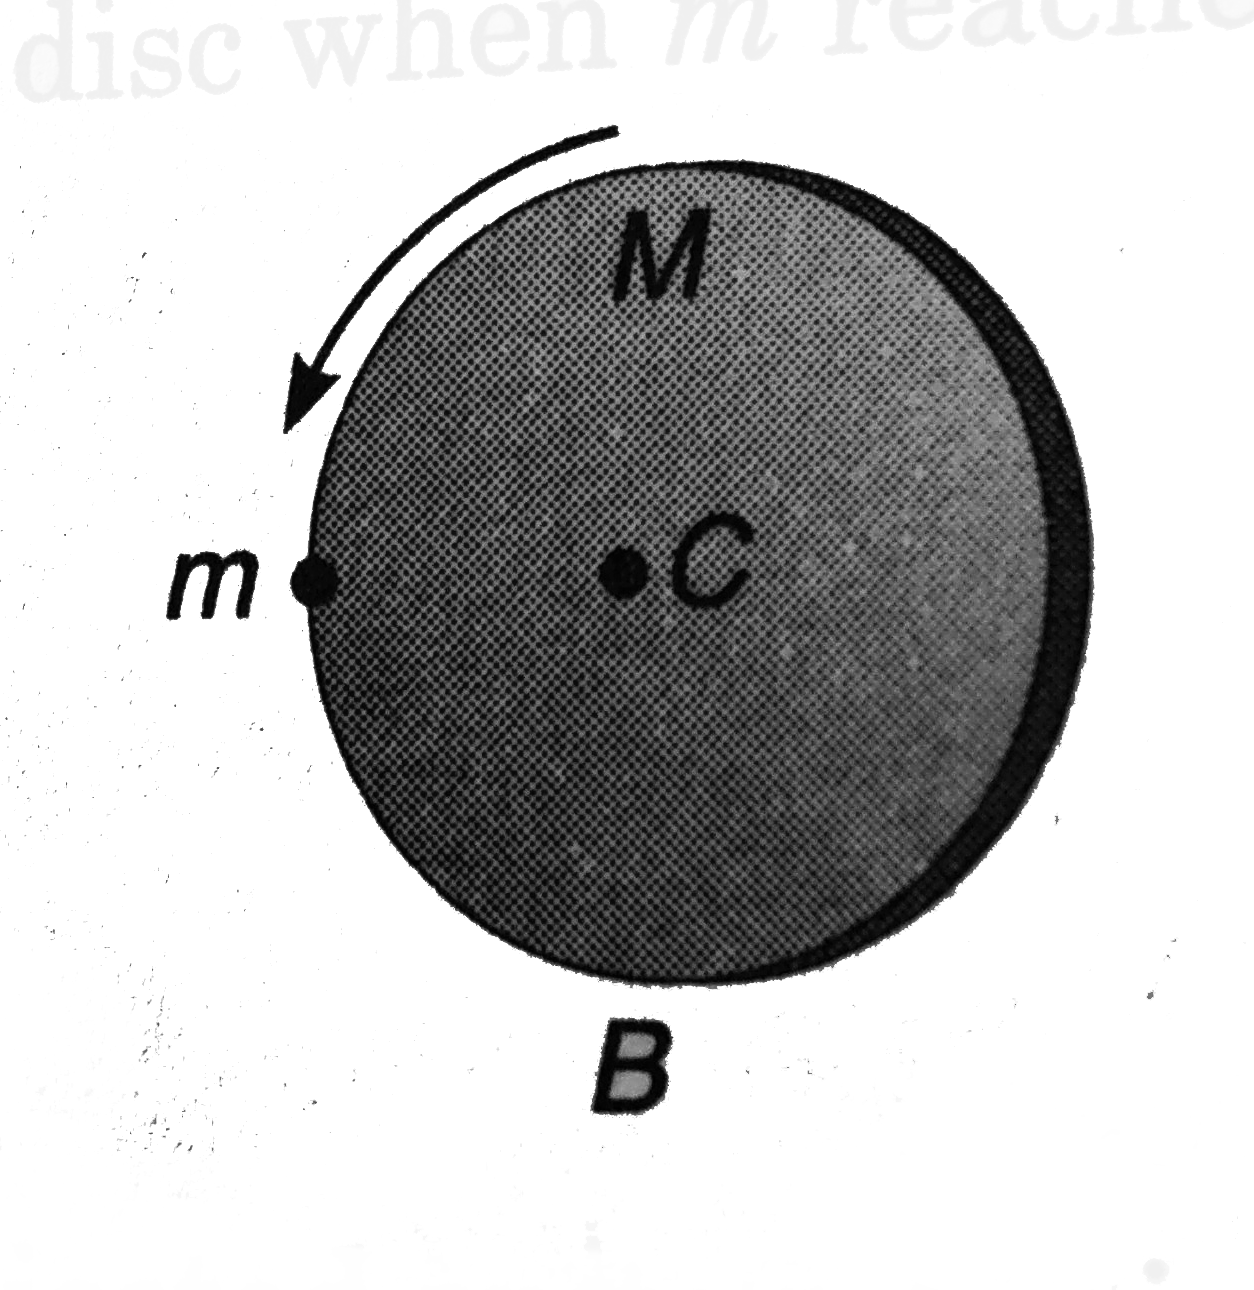 A uniform disc of mass M and radius R is pivoted about the horizontal axis through its centre C A point mass m is glued to the disc at its rim, as shown in figure. If the system is released from rest, find the angular velocity of the disc when m reaches the bottom point B.